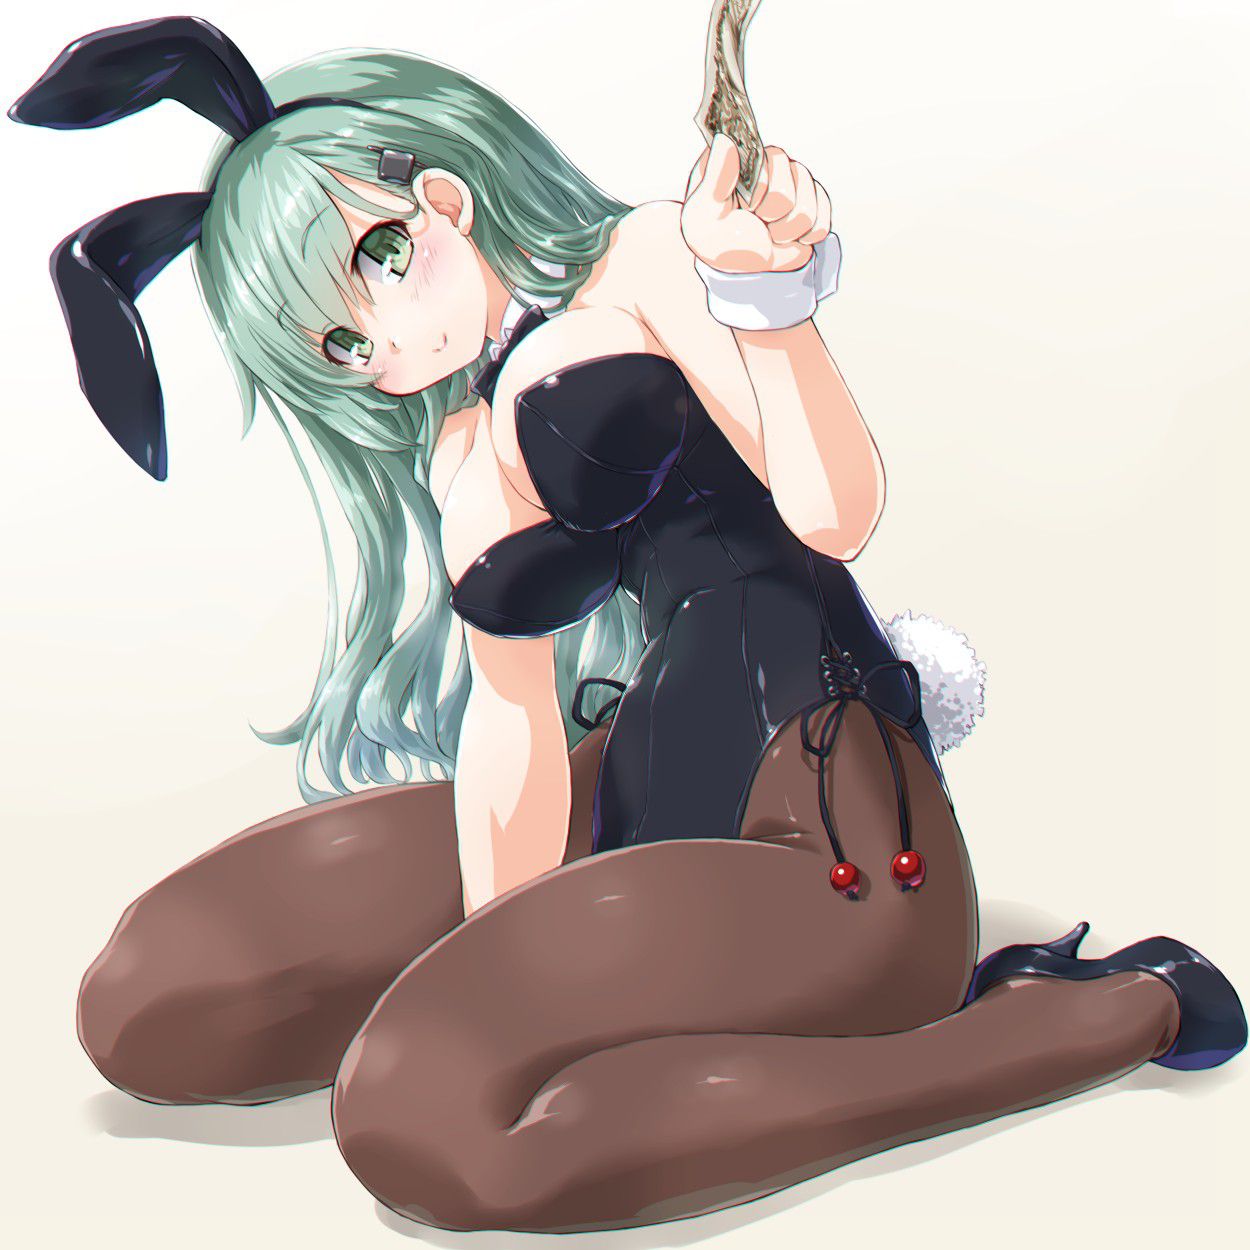 【Secondary erotic】 The secondary dosquebe image of a girl dressed in a bunny girl costume that stands out for the dosukebe of the buttocks and pie is here 6